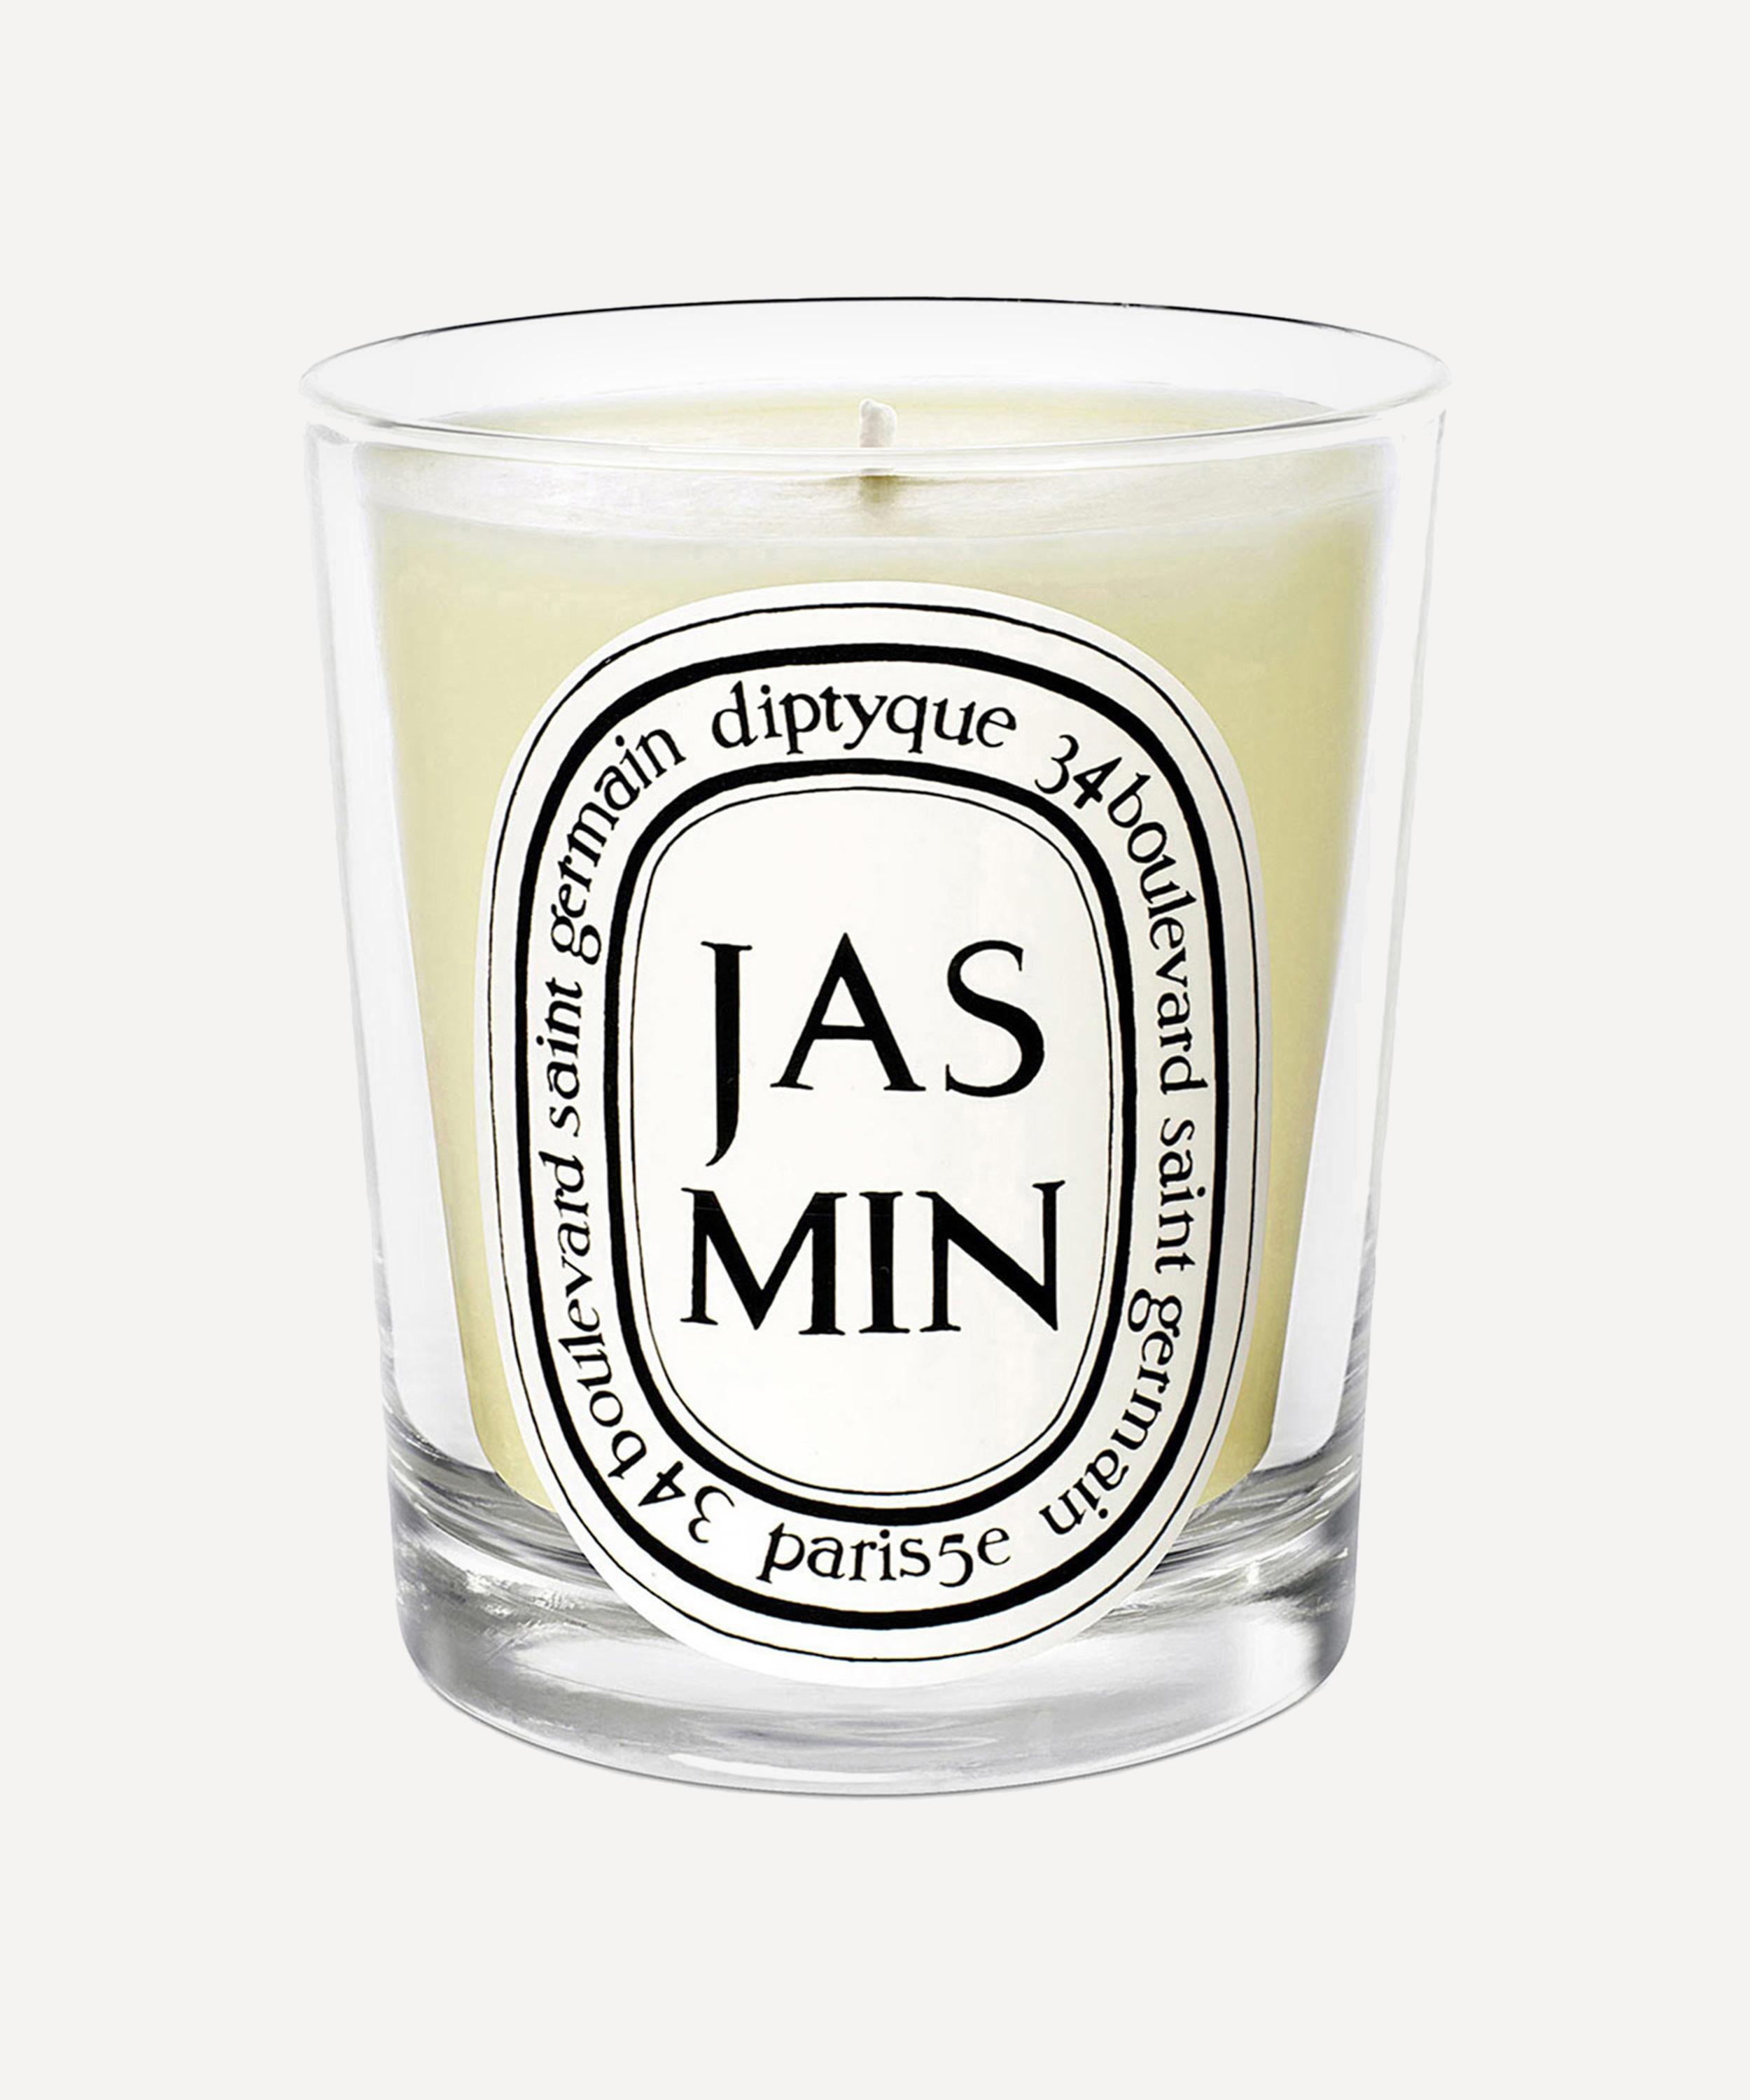 190g Candles Jasmin Jasmine Diptyque Scented Candle 